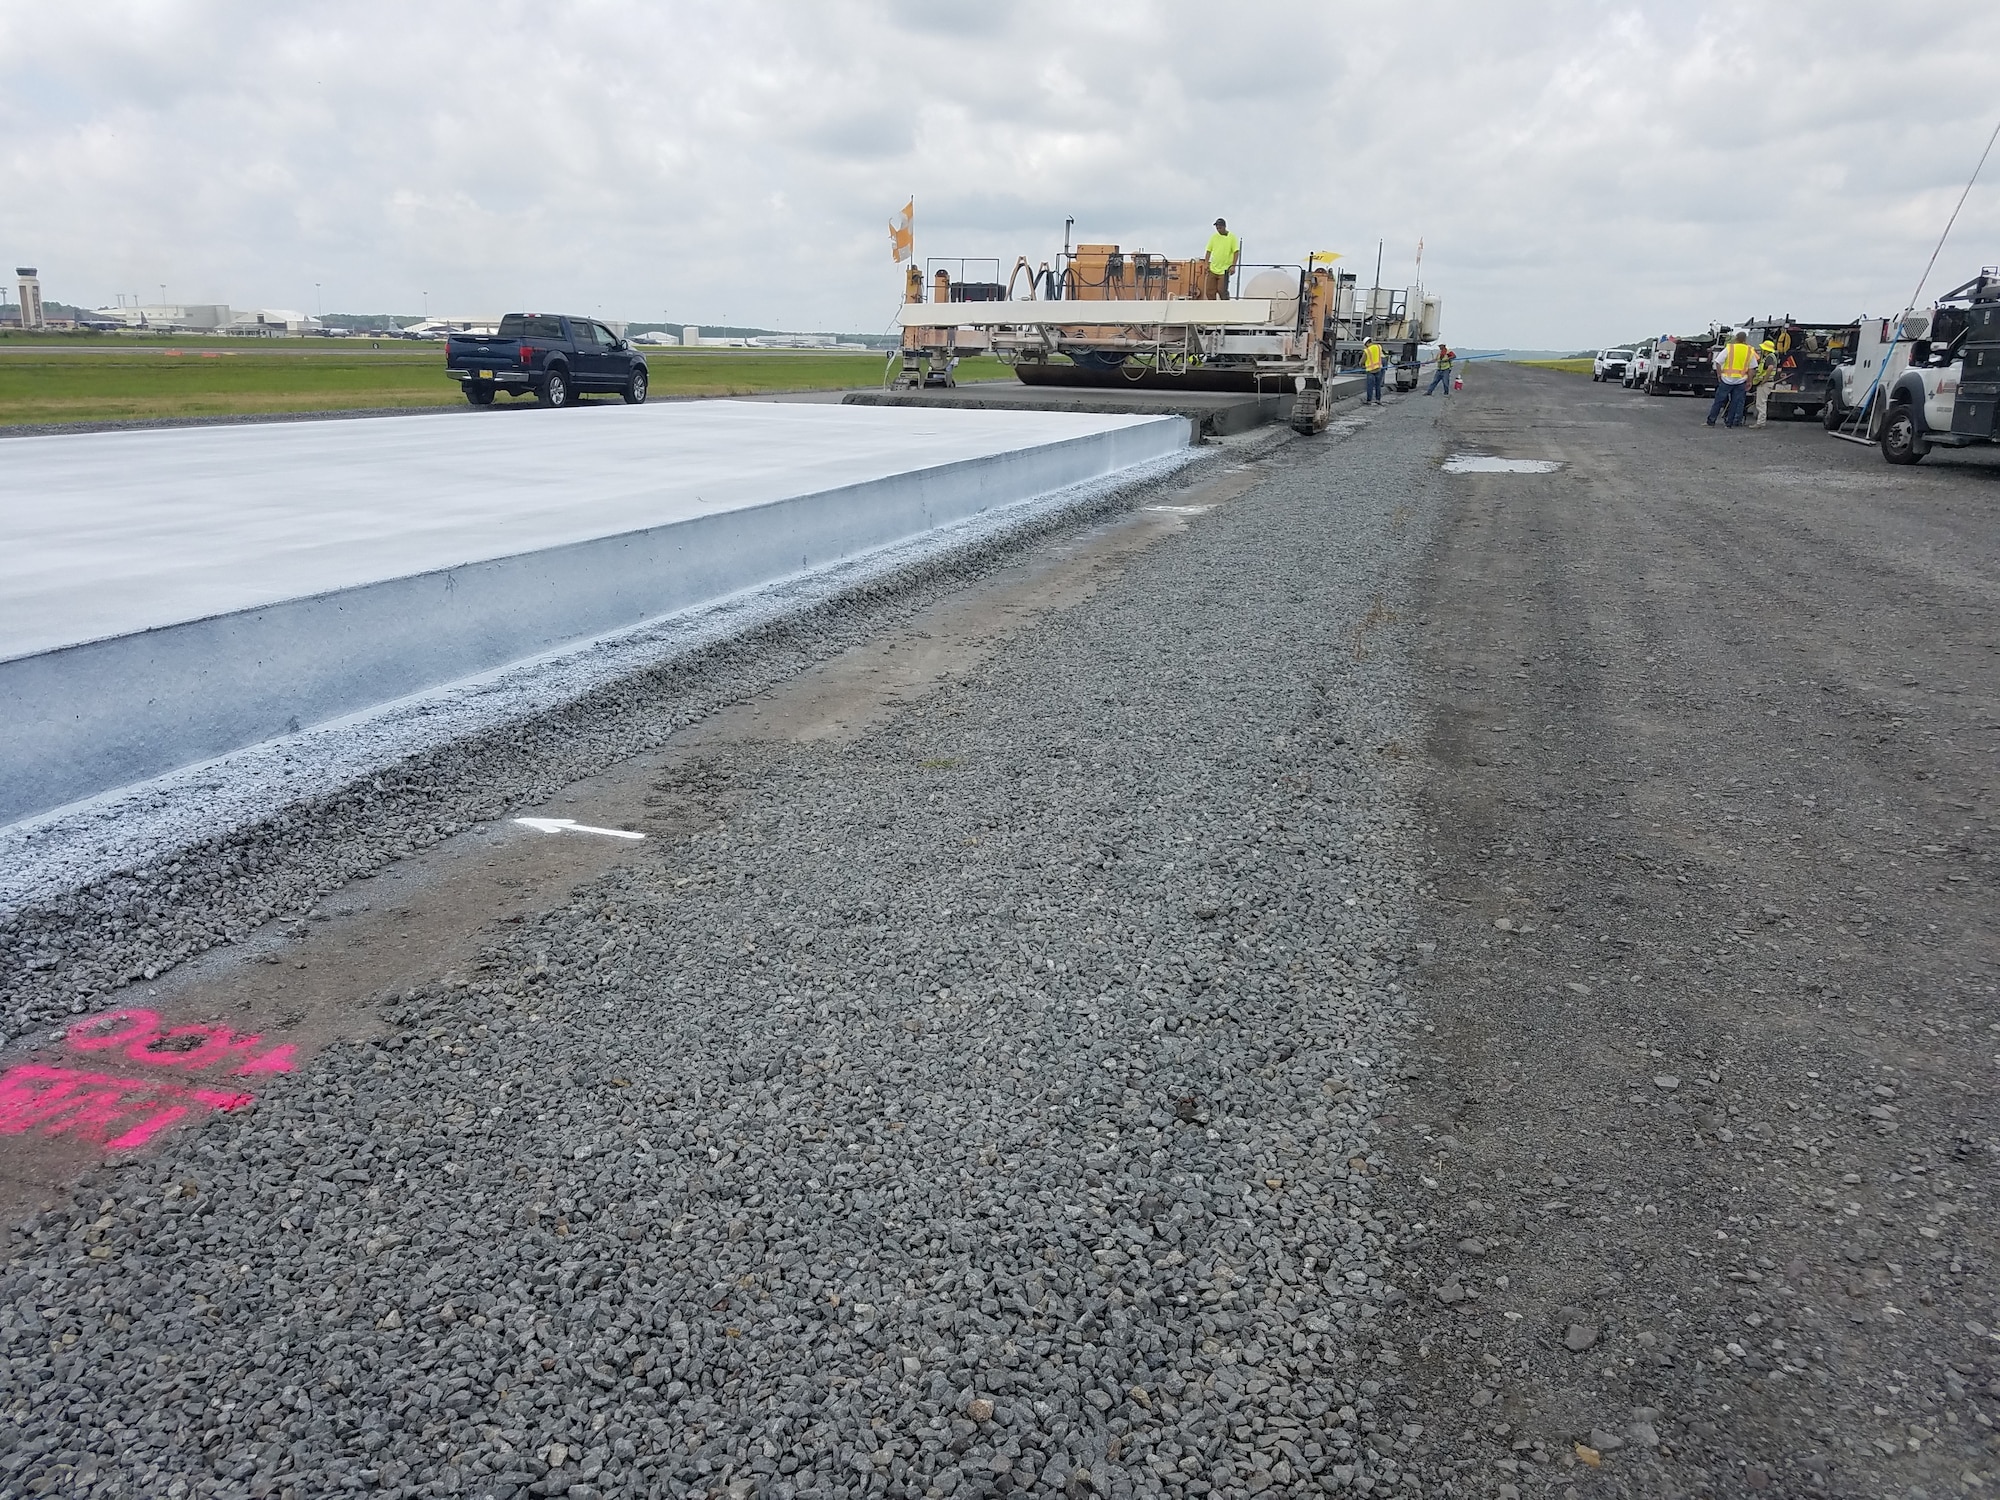 The Air Force Civil Engineer Center will serve as the design and construction agent for the 12,000-foot-long runway at Little Rock Air Force Base, Arkansas.